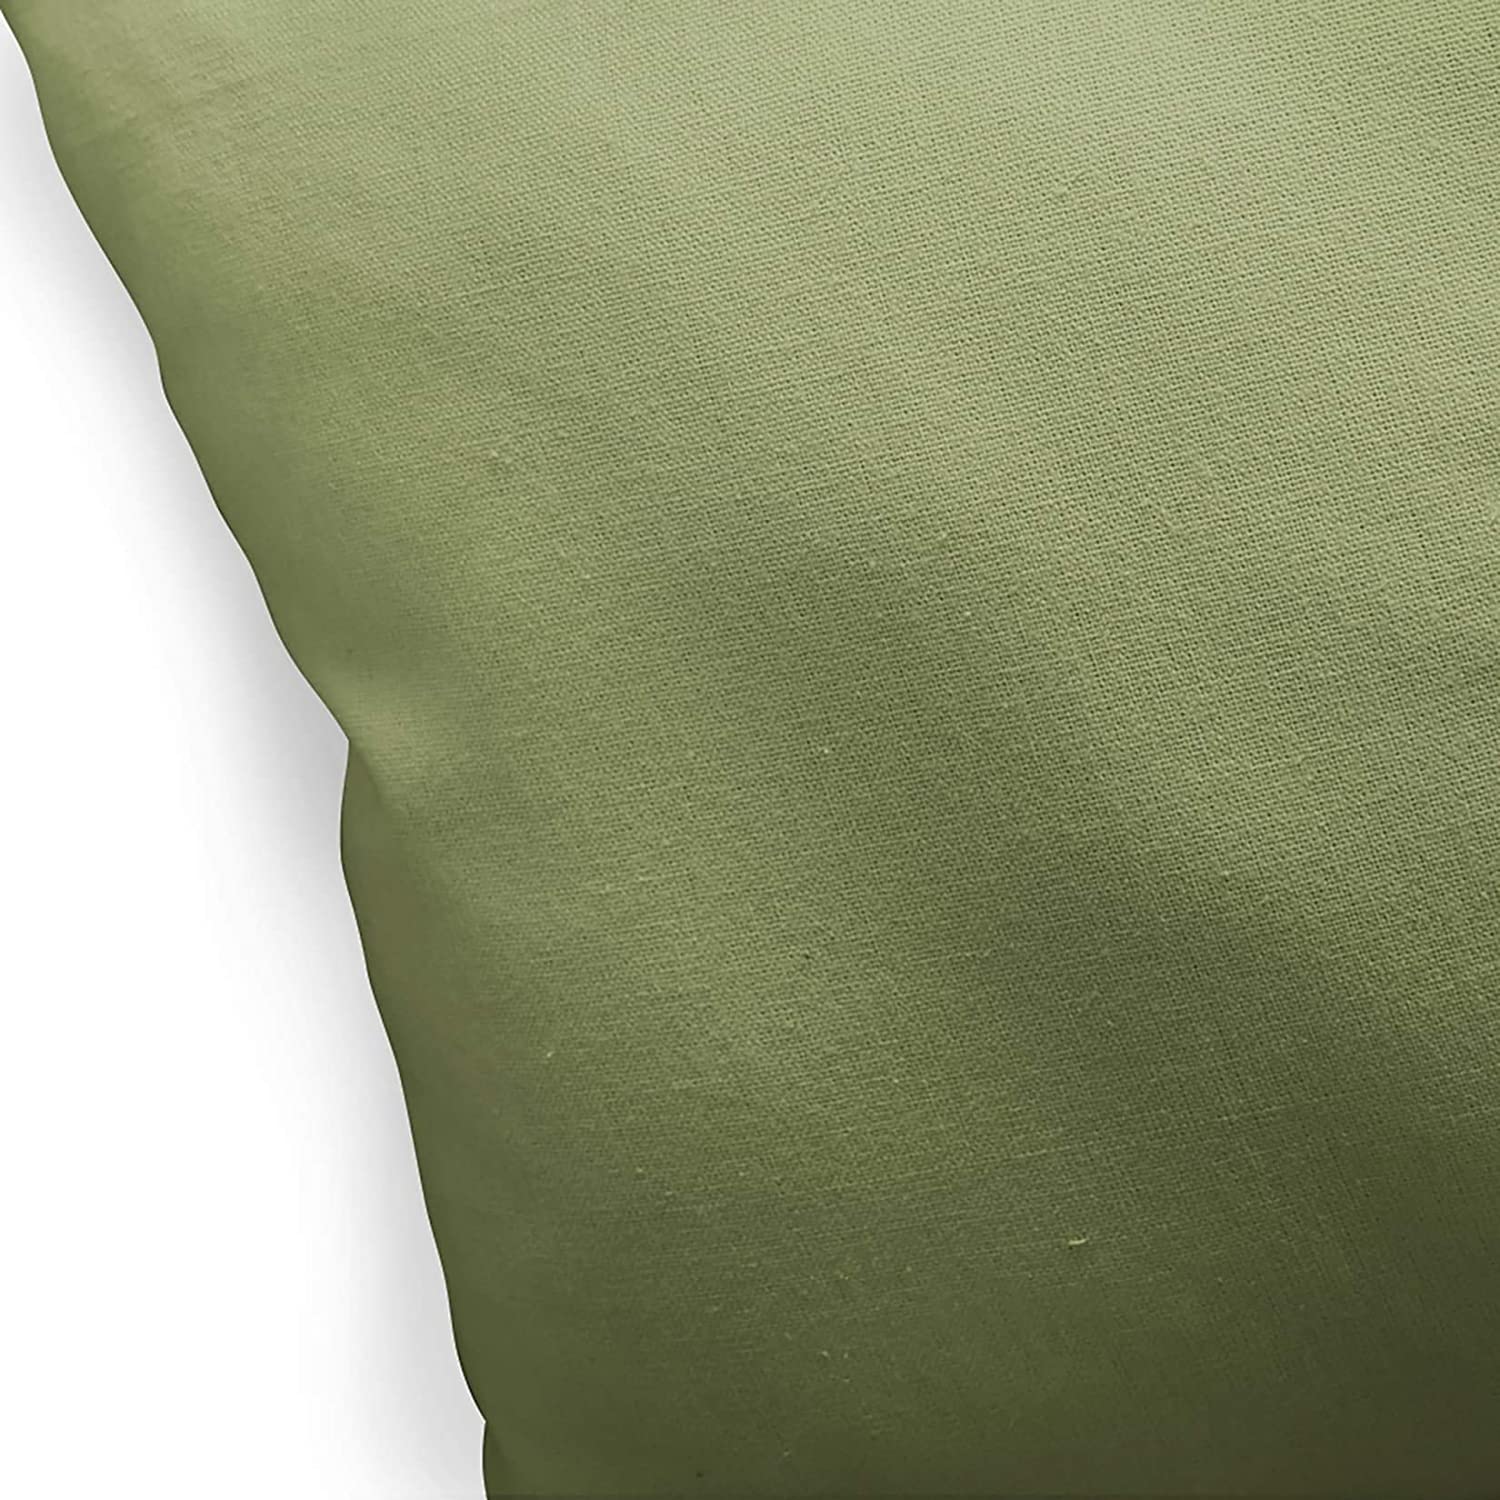 Garden Green Indoor|Outdoor Pillow by 18x18 Green Modern Contemporary Polyester Removable Cover